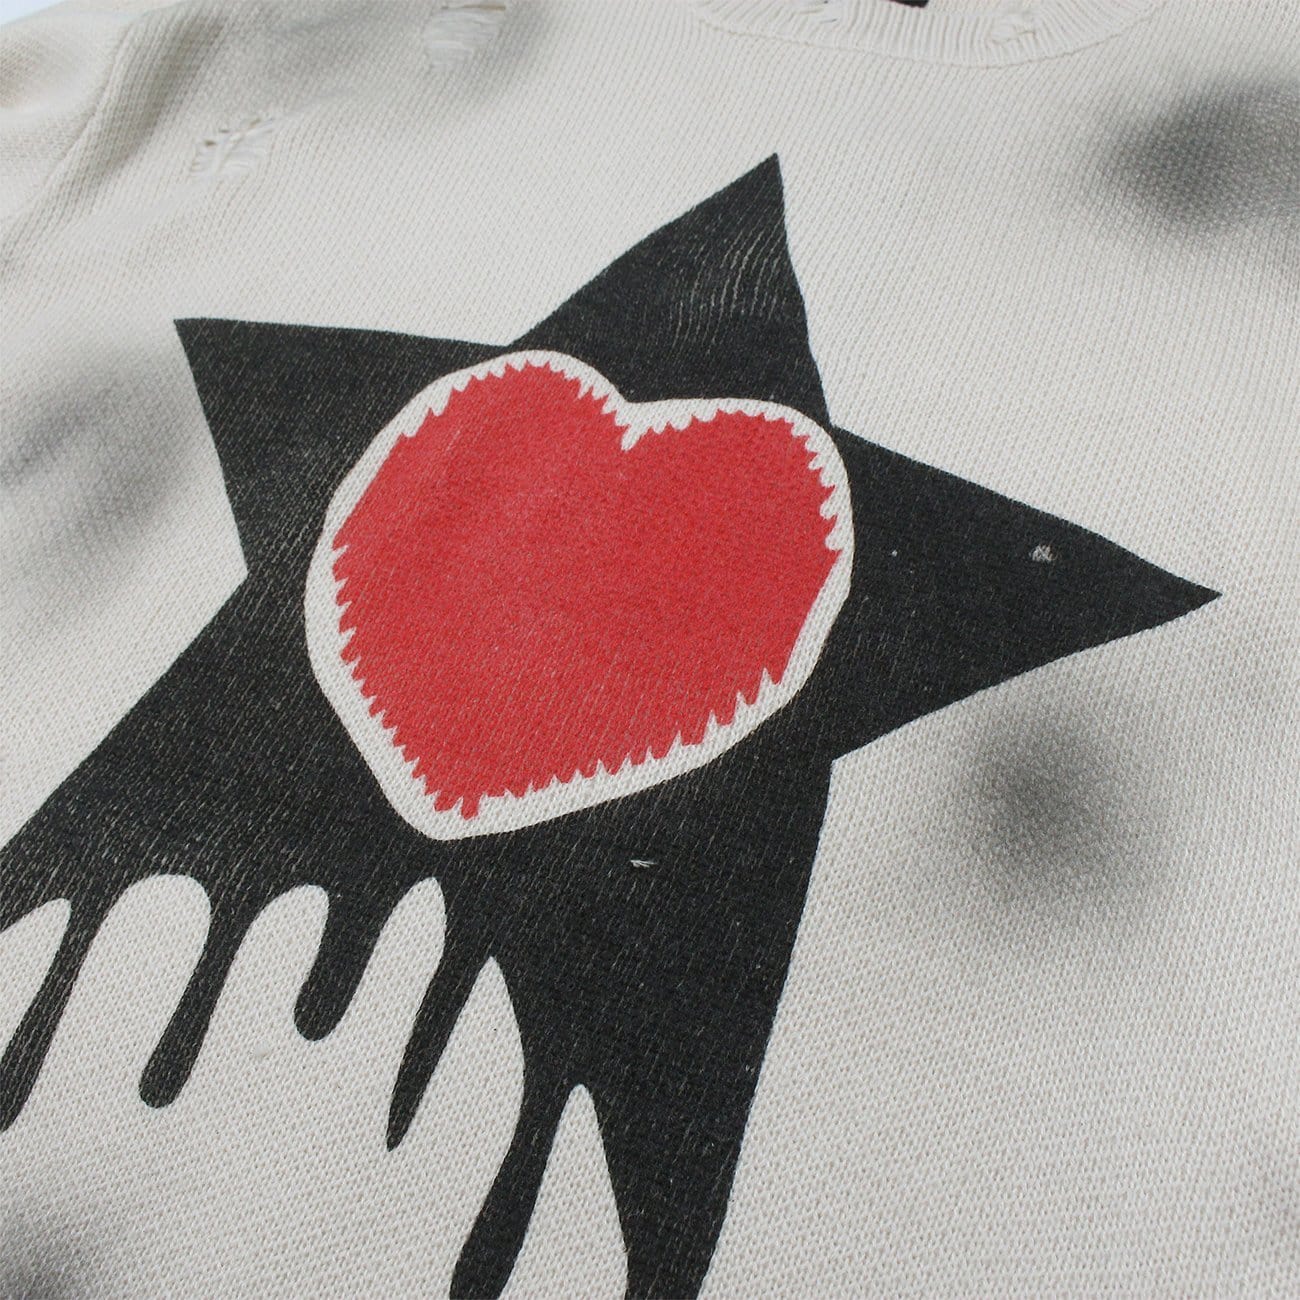 TO Dark Tie-Dye Ripped Five-Pointed Star Love Knitted Sweater